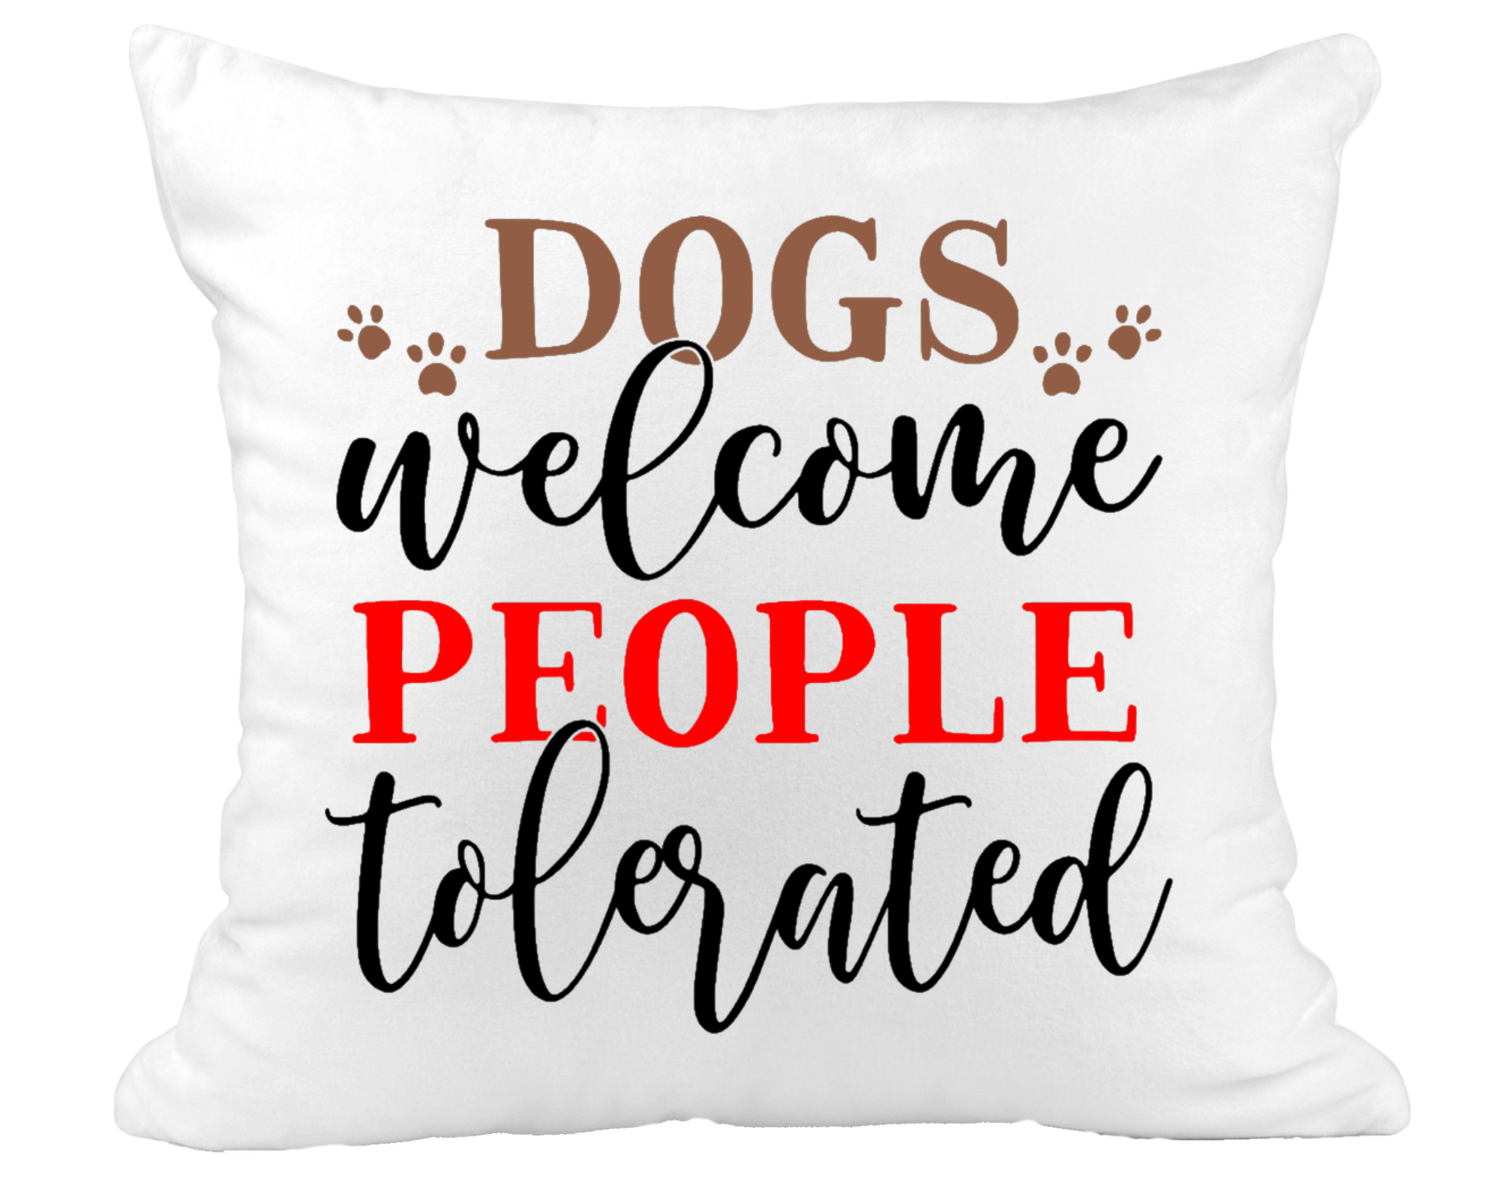 Pillow Suede Dog: DOGS WELCOME PEOPLE TOLERATED